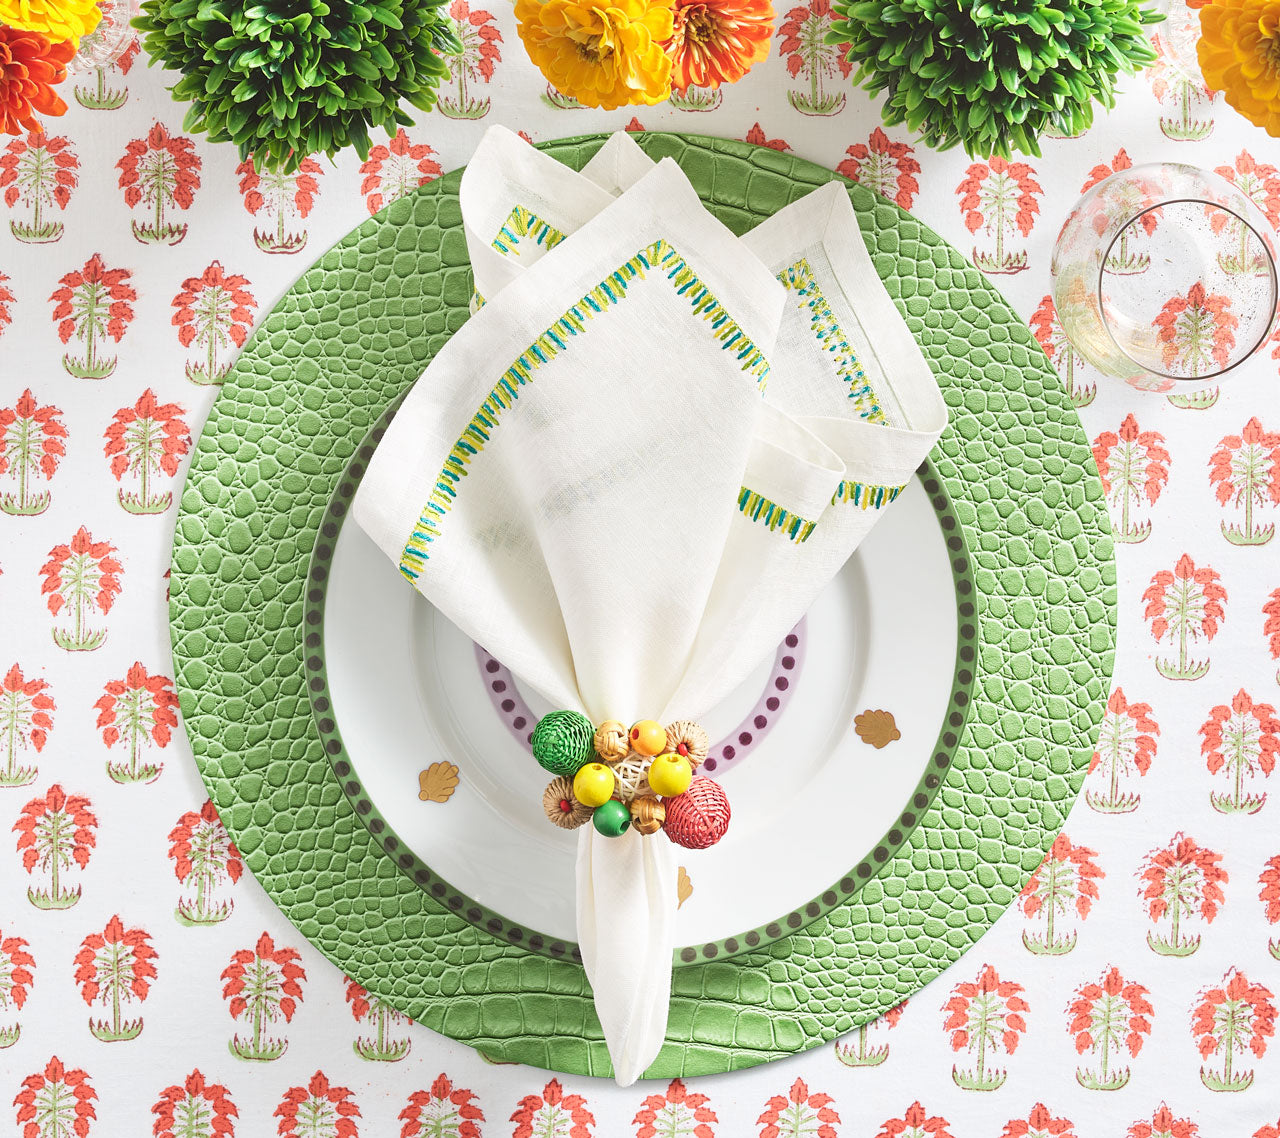 Java Napkin Ring holding a white & green napkin on a green placemat